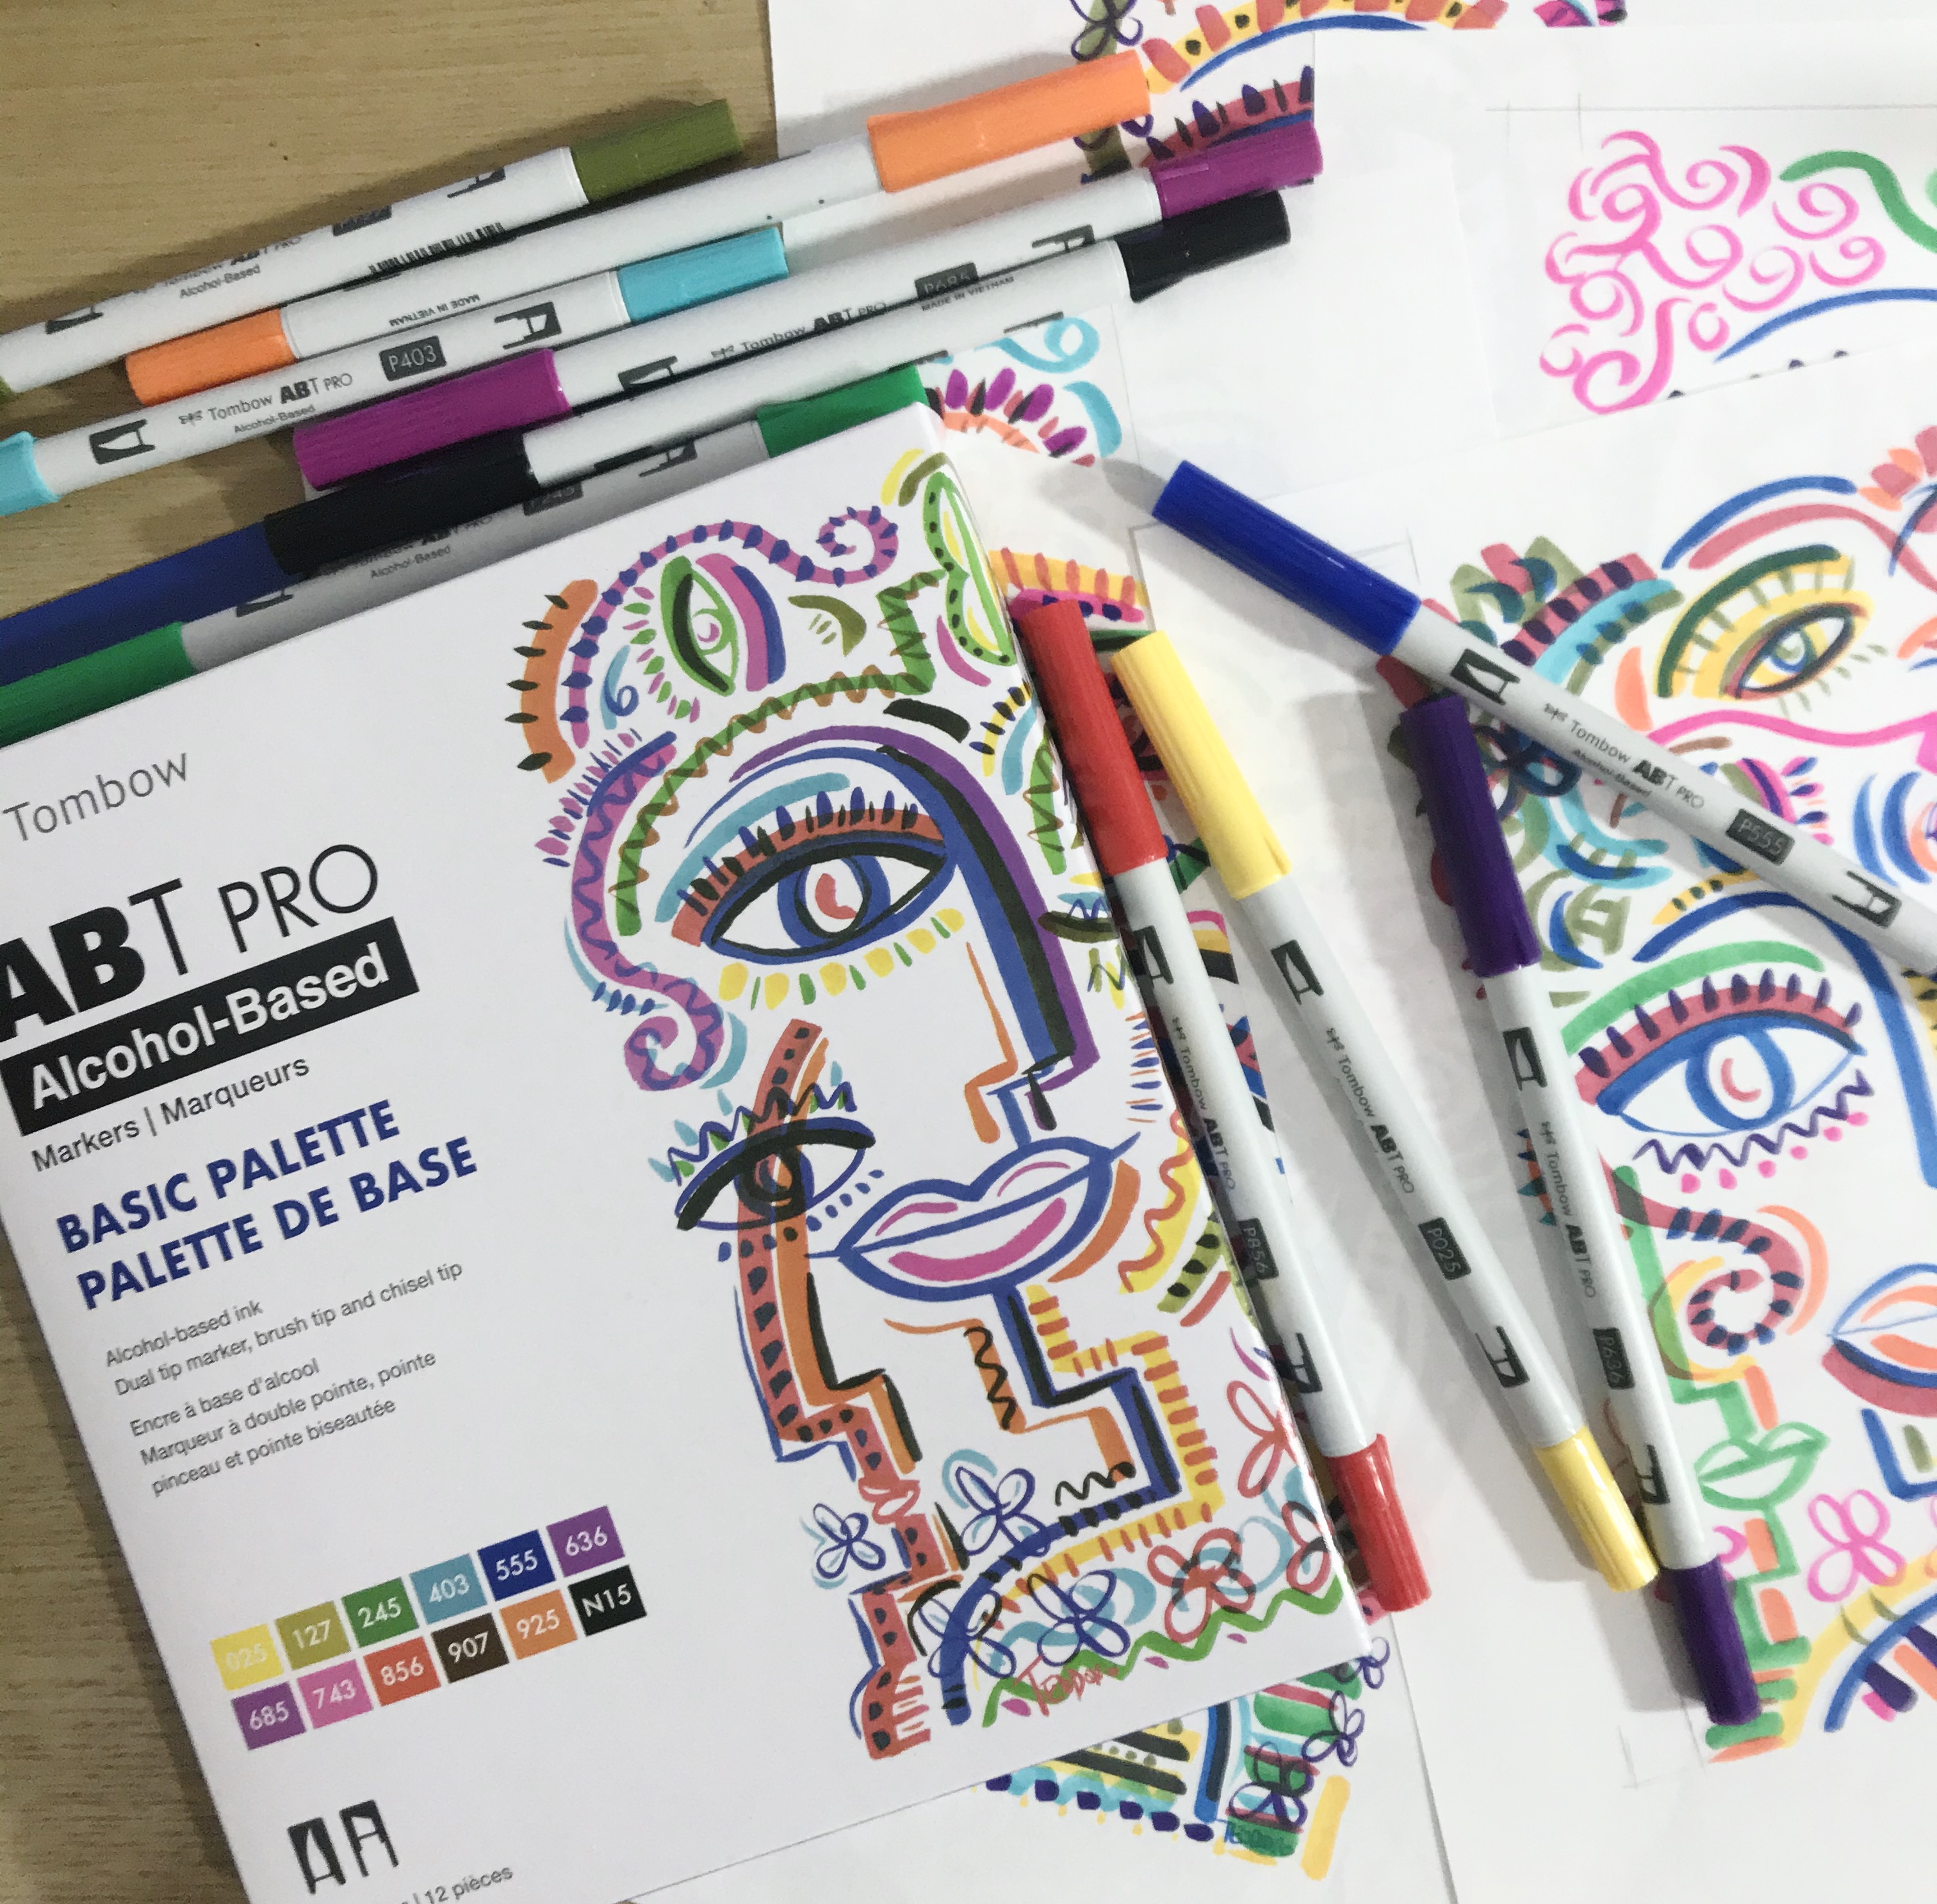 Tombow ABT PRO Alcohol-Based Markers